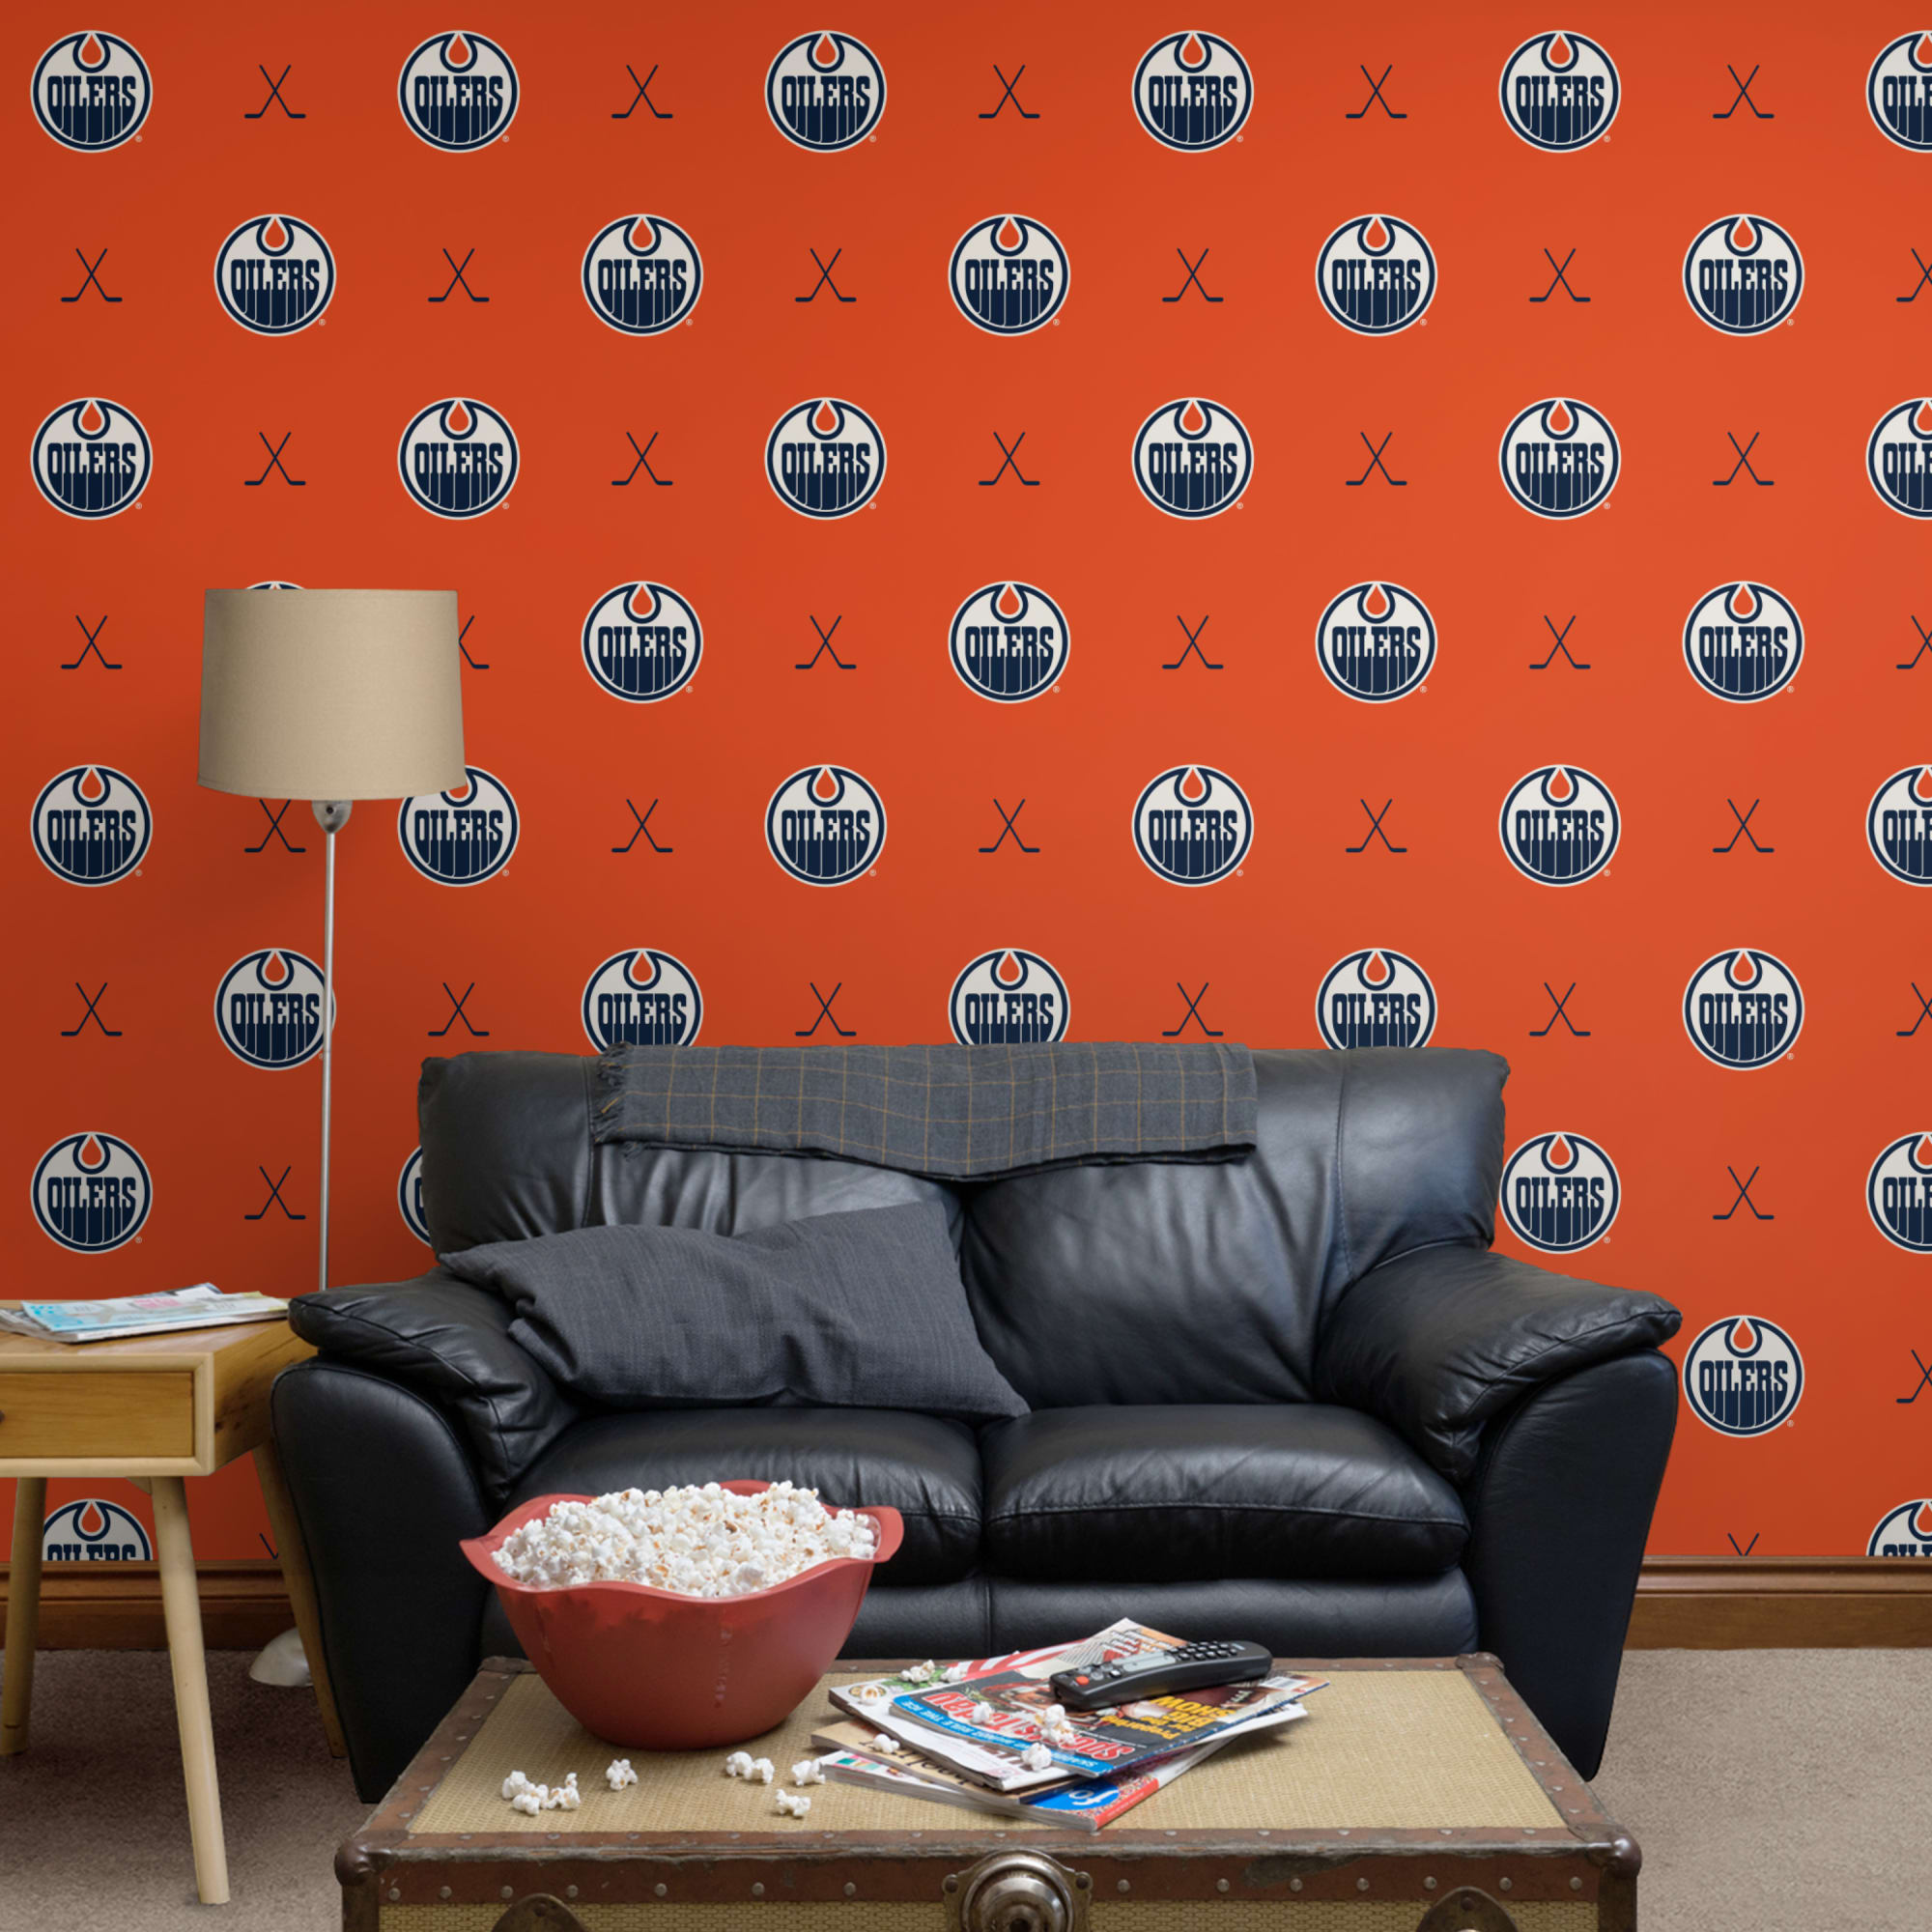 Edmonton Oilers: Sticks Pattern - Officially Licensed NHL Removable Wallpaper 12" x 12" Sample by Fathead